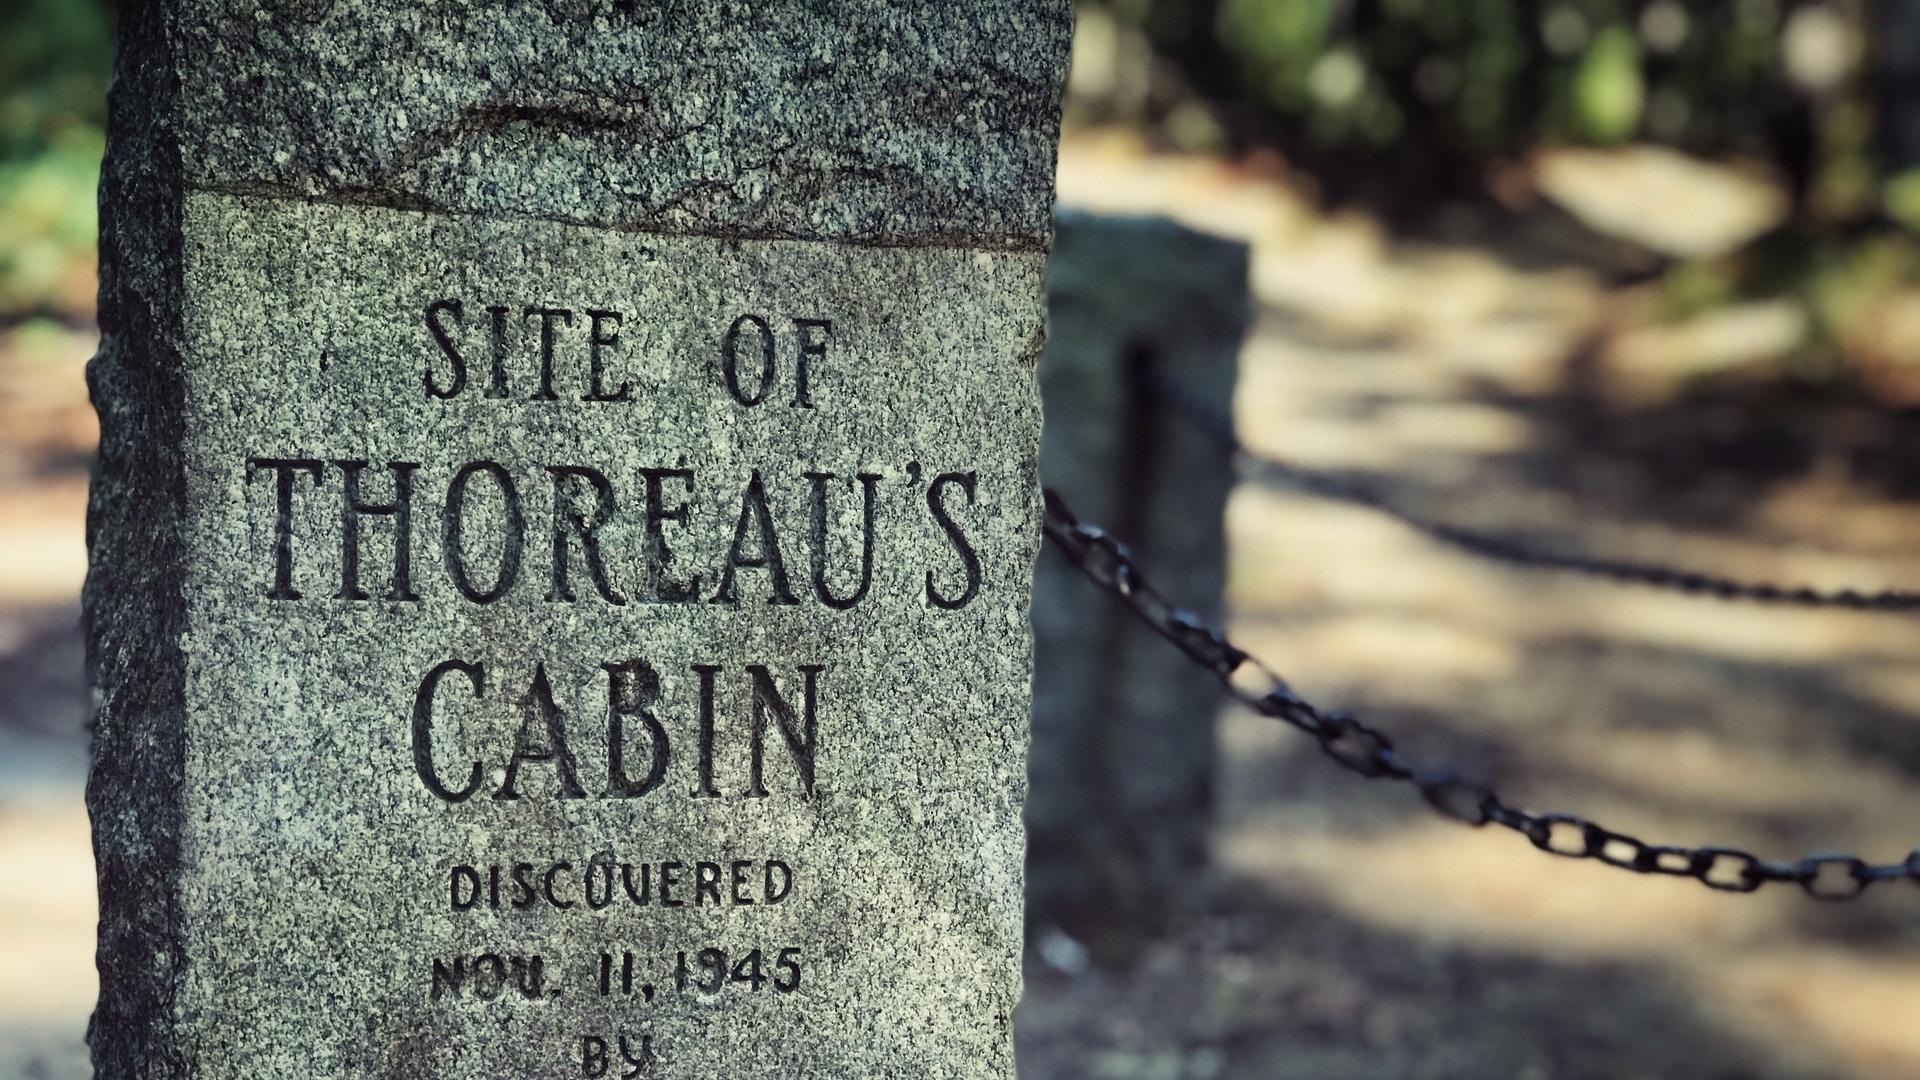 Marker for the site of Thoreau's Cabin